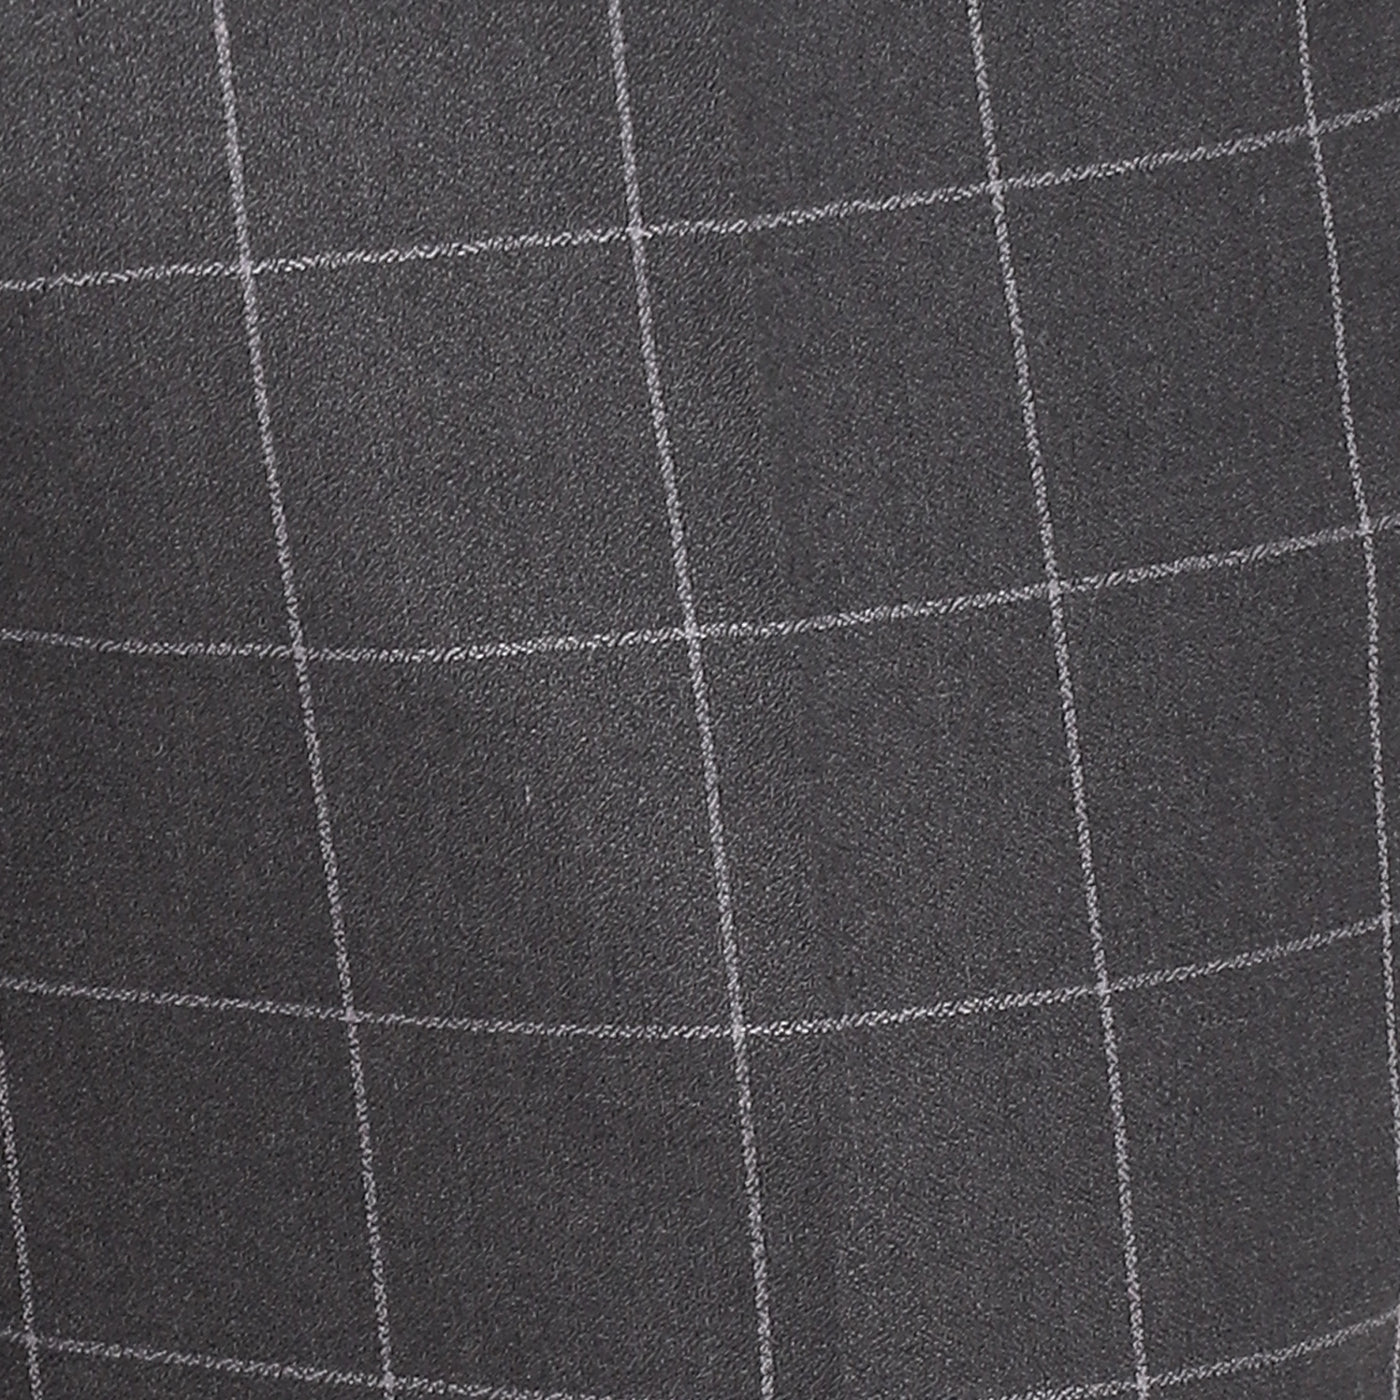 Grey Checked Slim Fit Trouser